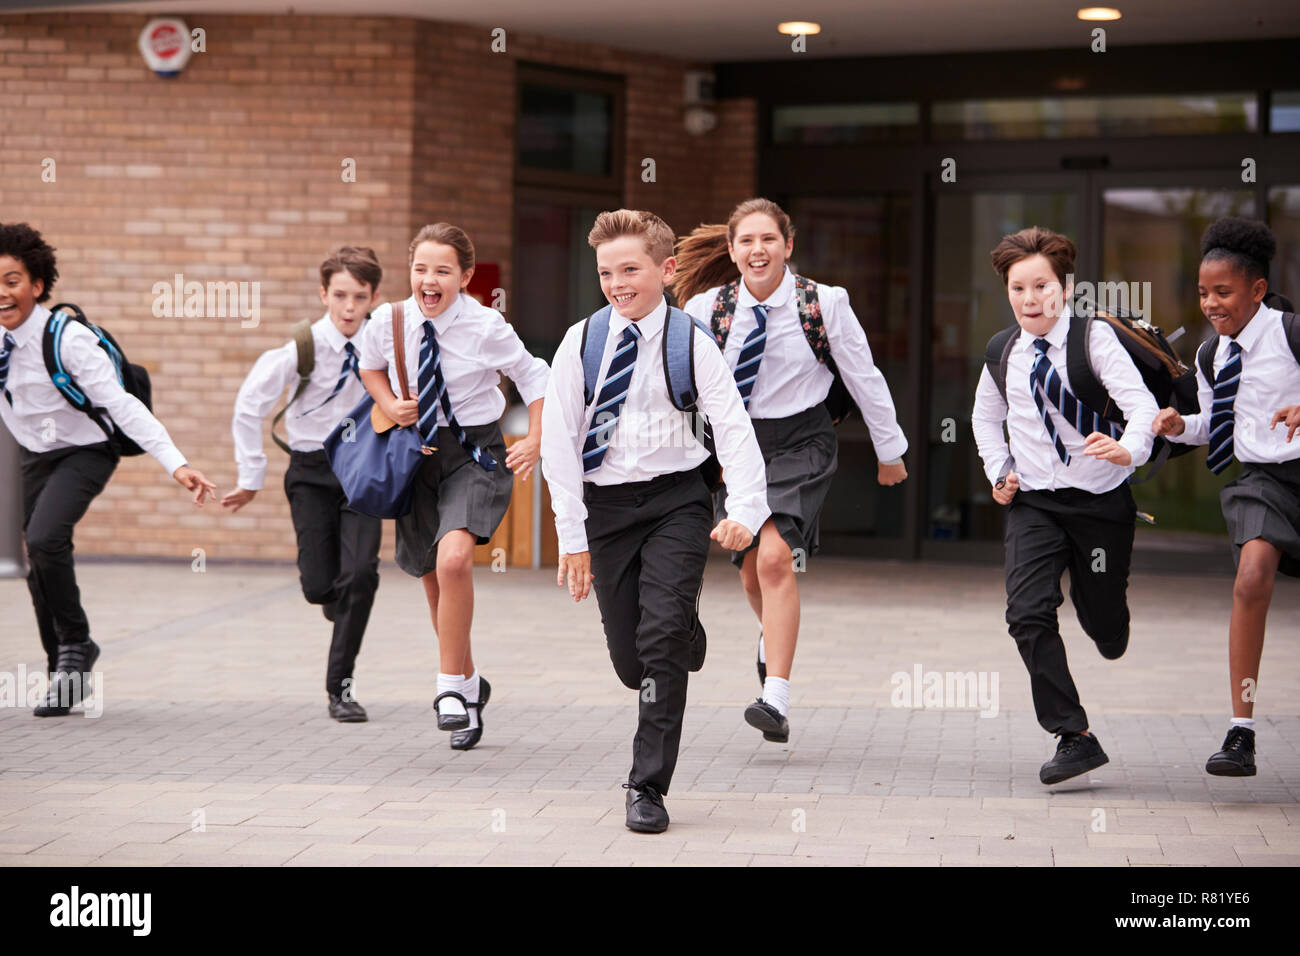 Group Of High School Students Wearing Uniform Running Out Of School Buildings Towards Camera At The End Of Class Stock Photo